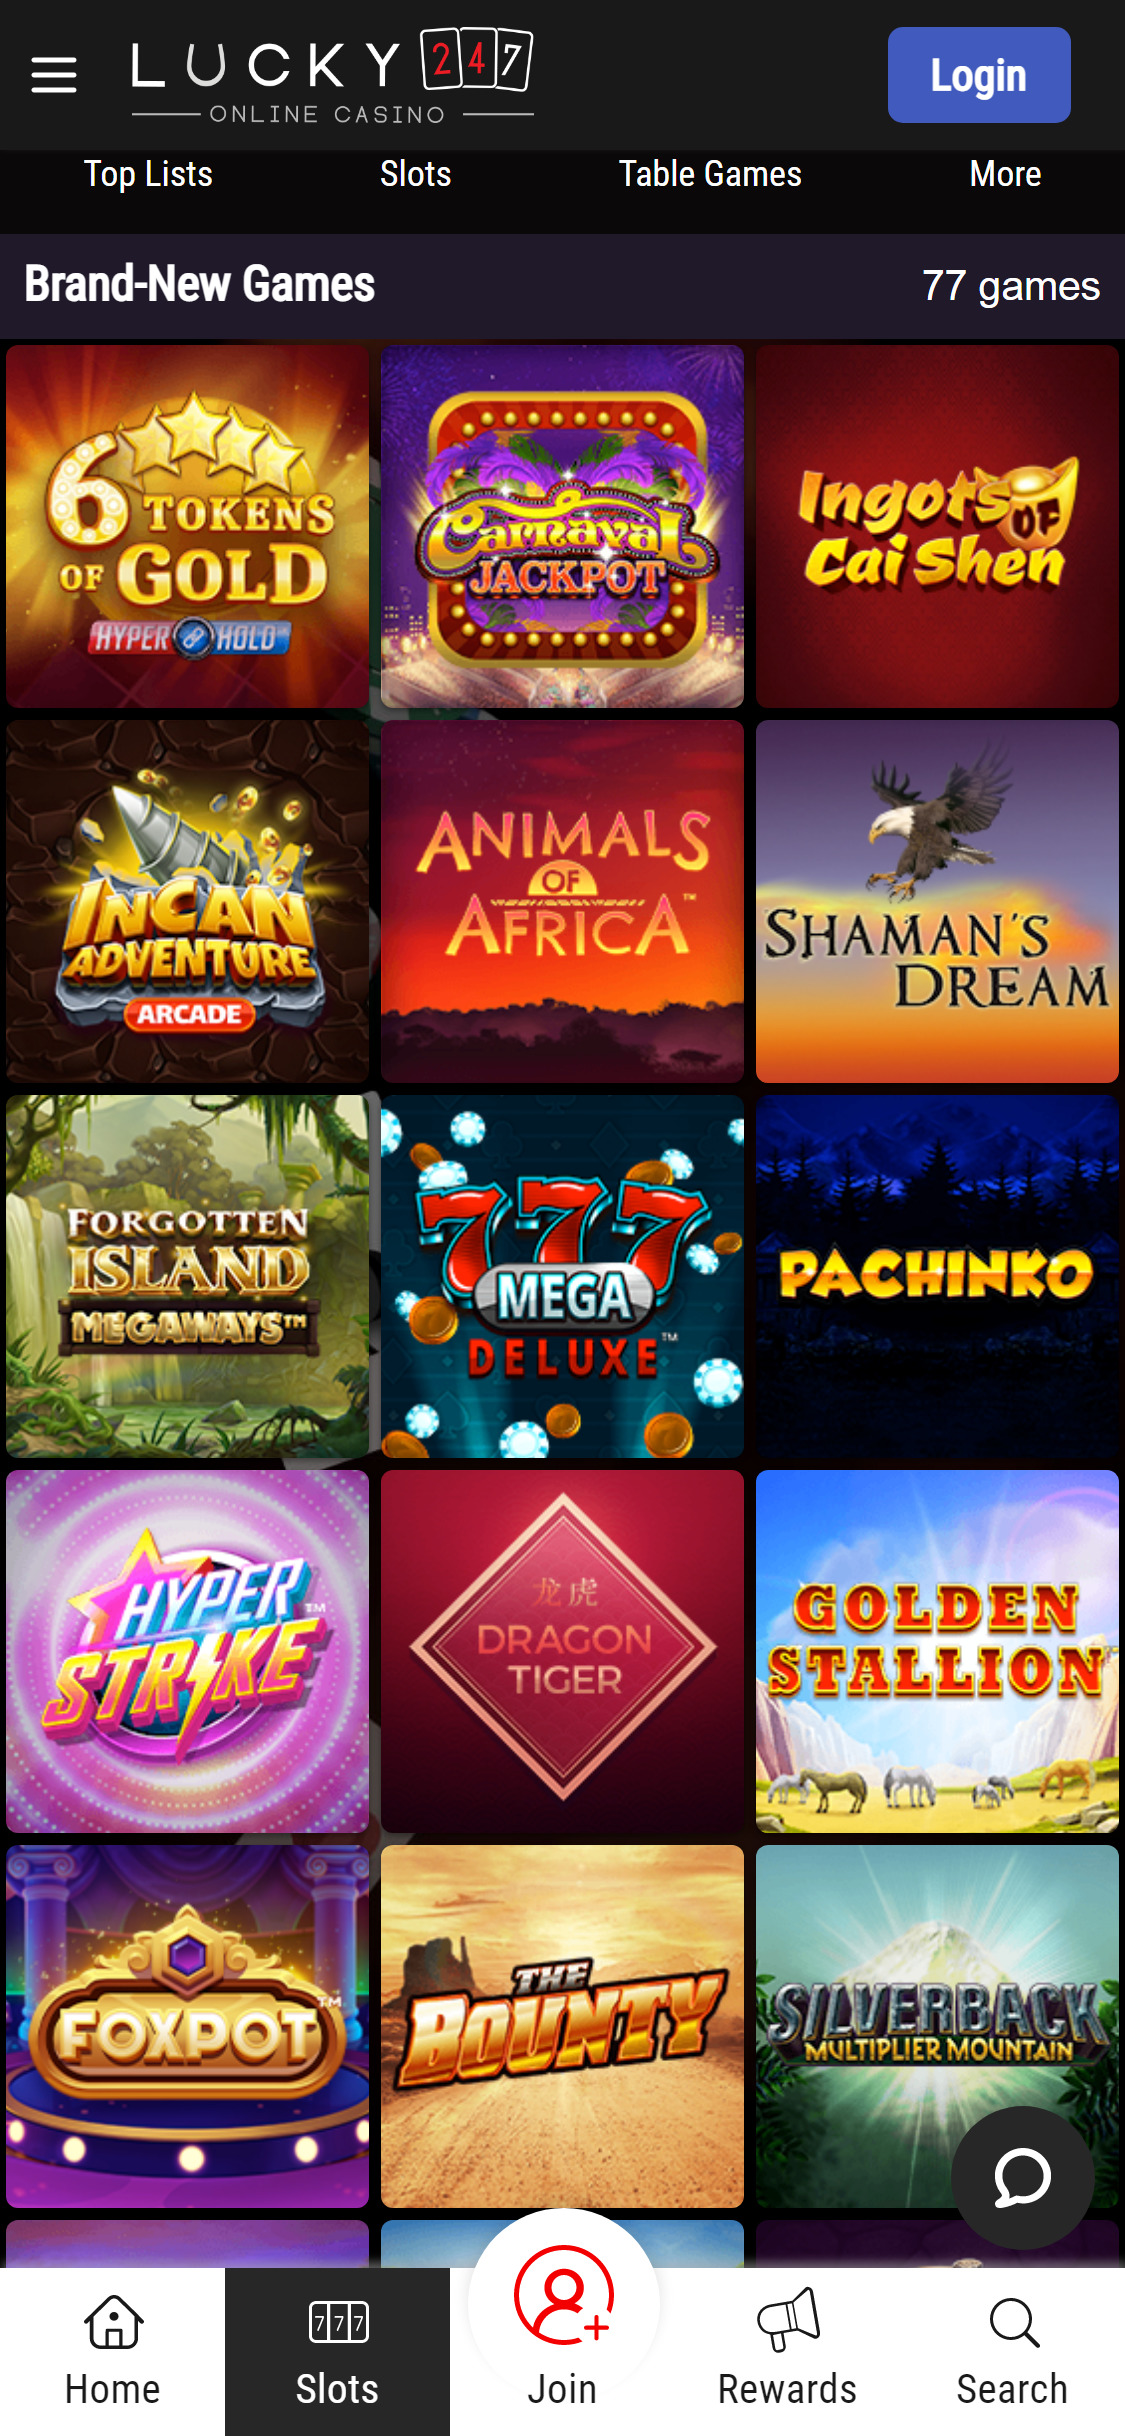 Lucky247 Casino Mobile Games Review